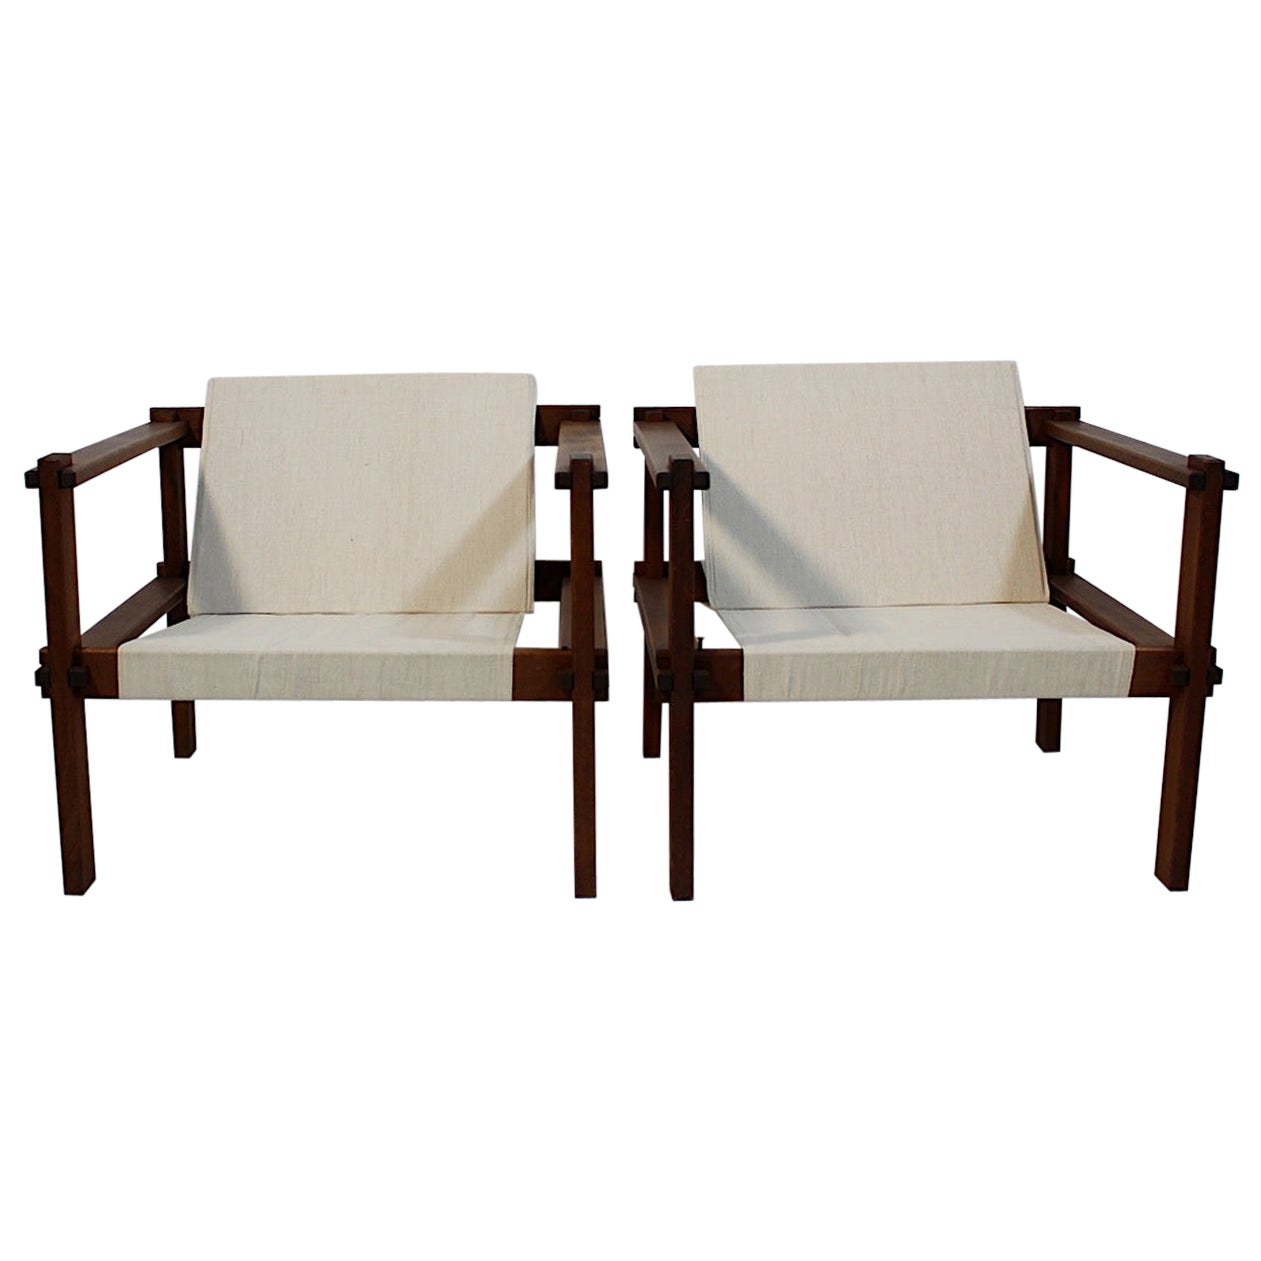 Bauhaus Pair Duo Beech Canvas Geometric Lounge Chairs 1920s Germany For Sale